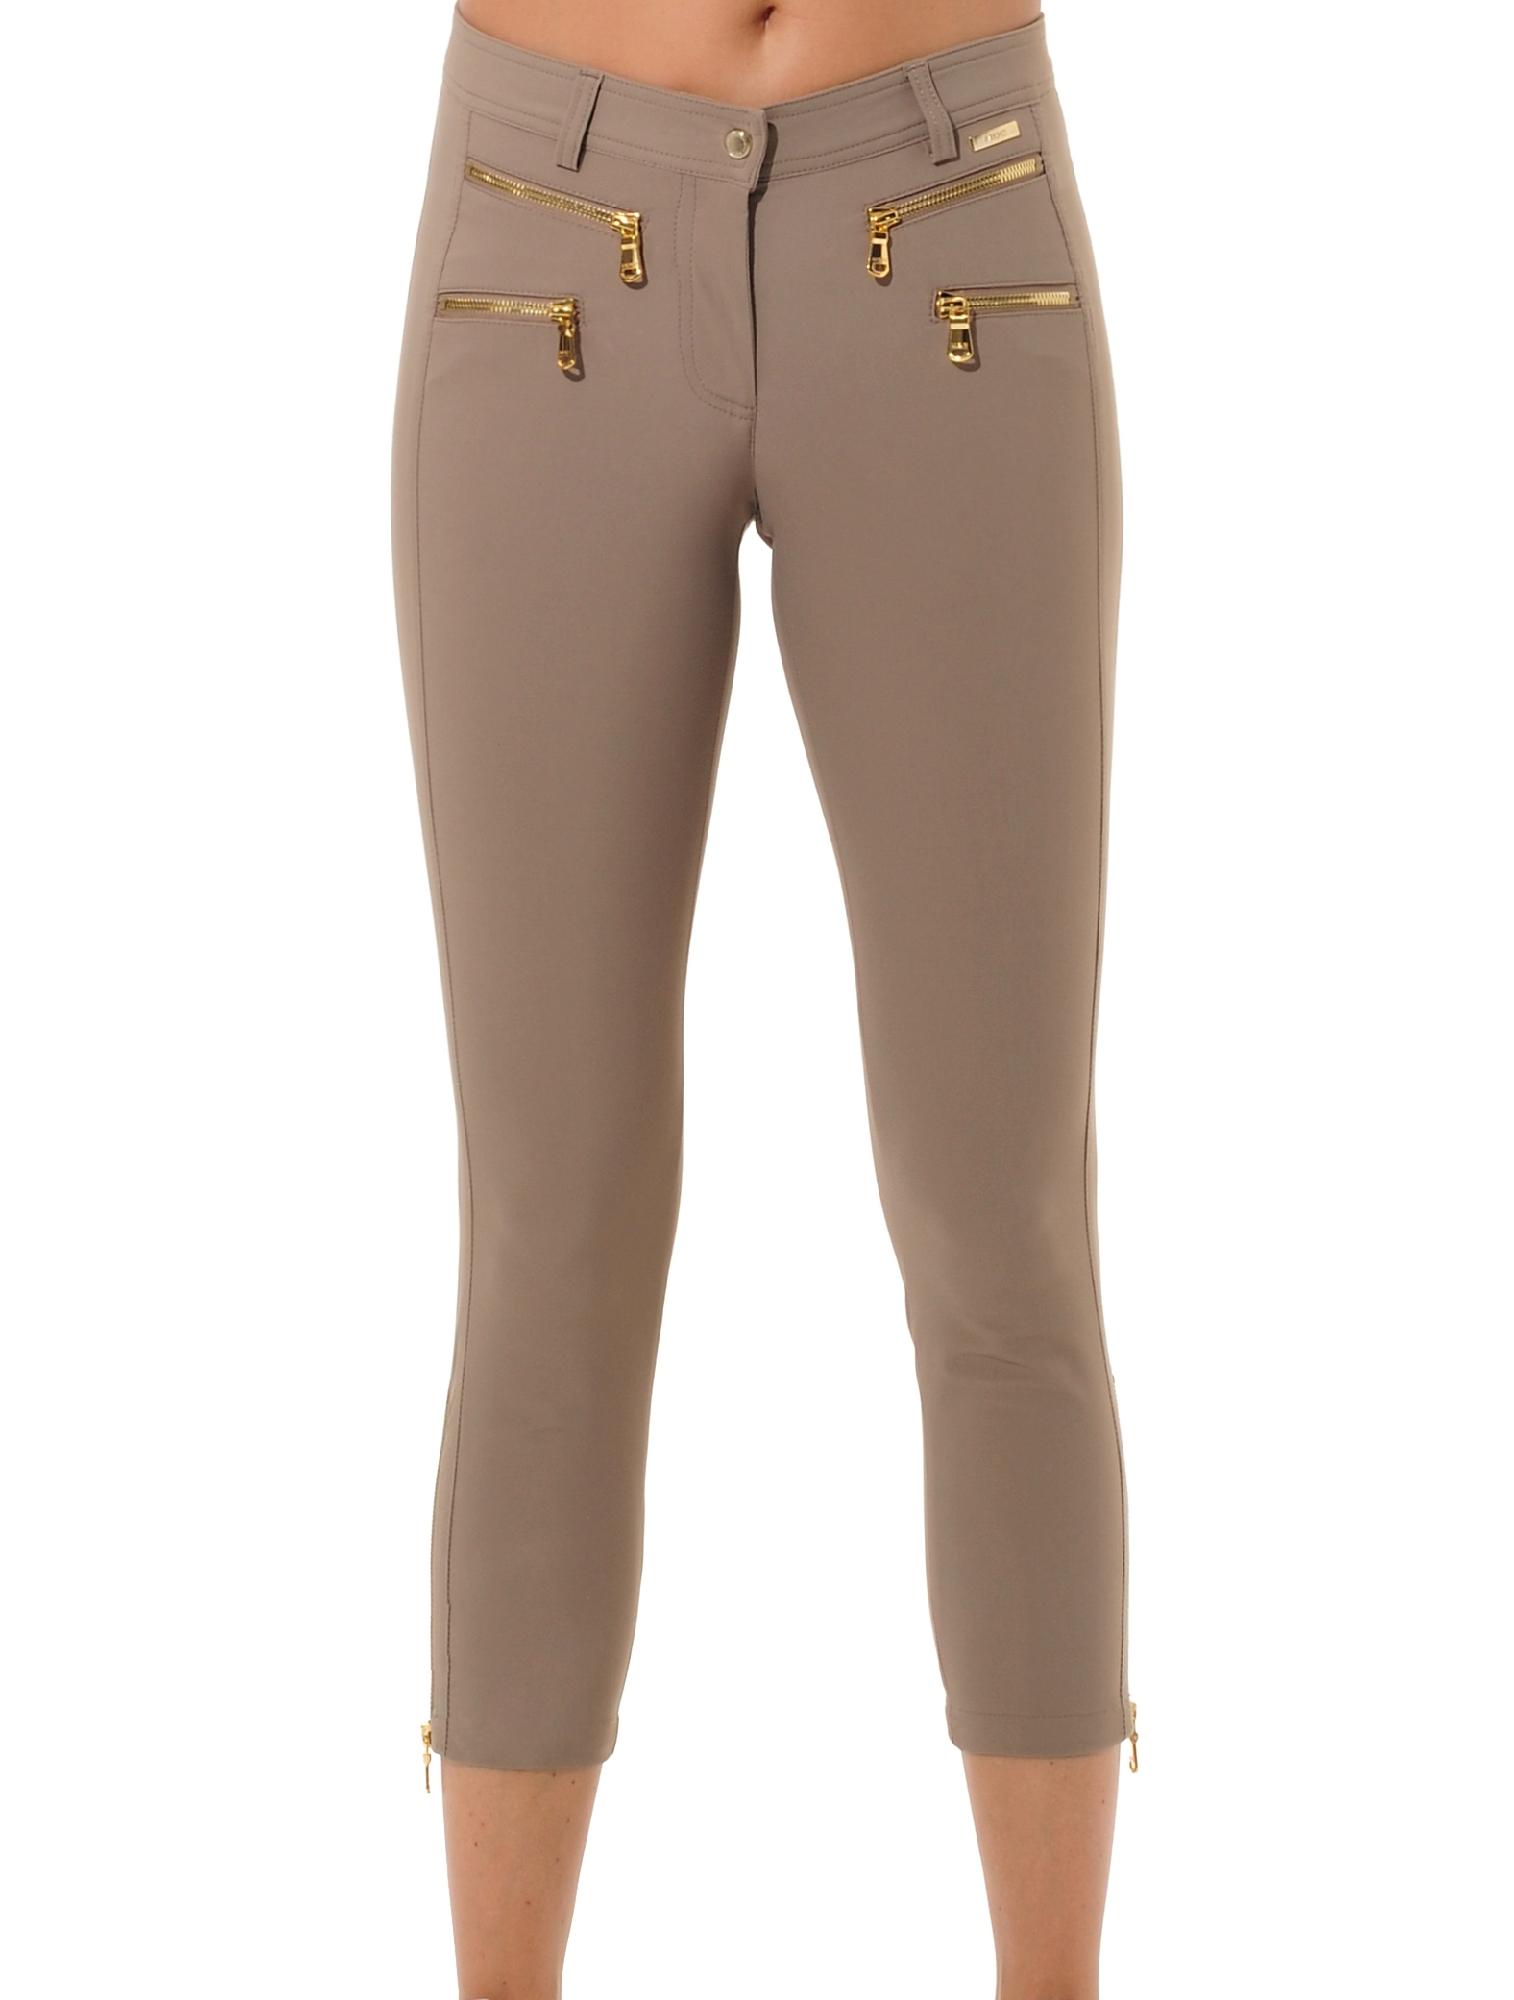 4way stretch shiny gold double zip cropped pants toffee 